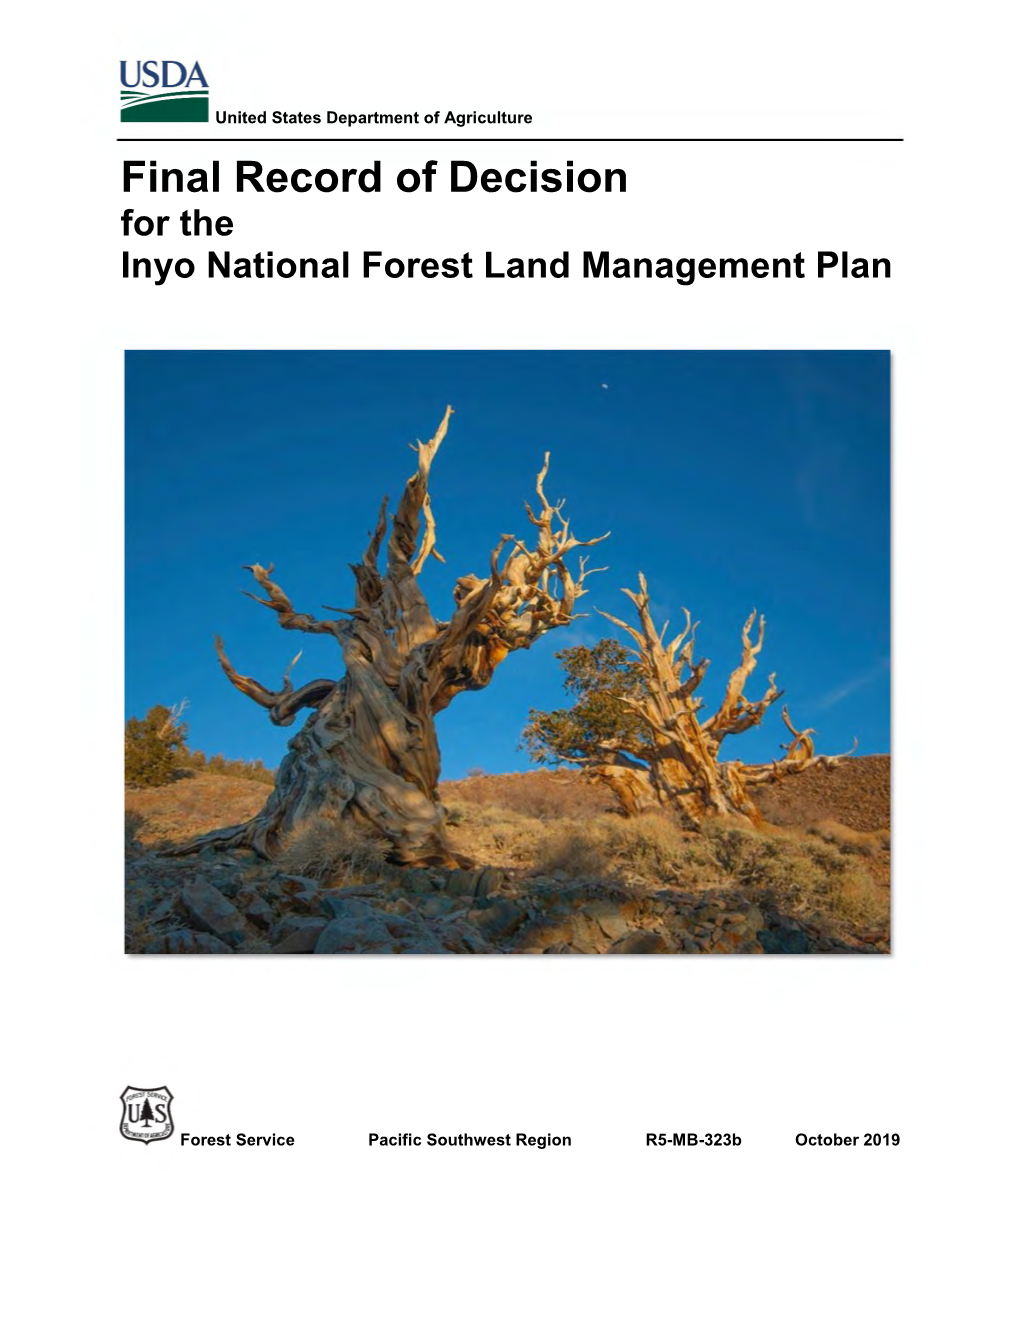 Final Record of Decision for the Inyo National Forest Land Management Plan